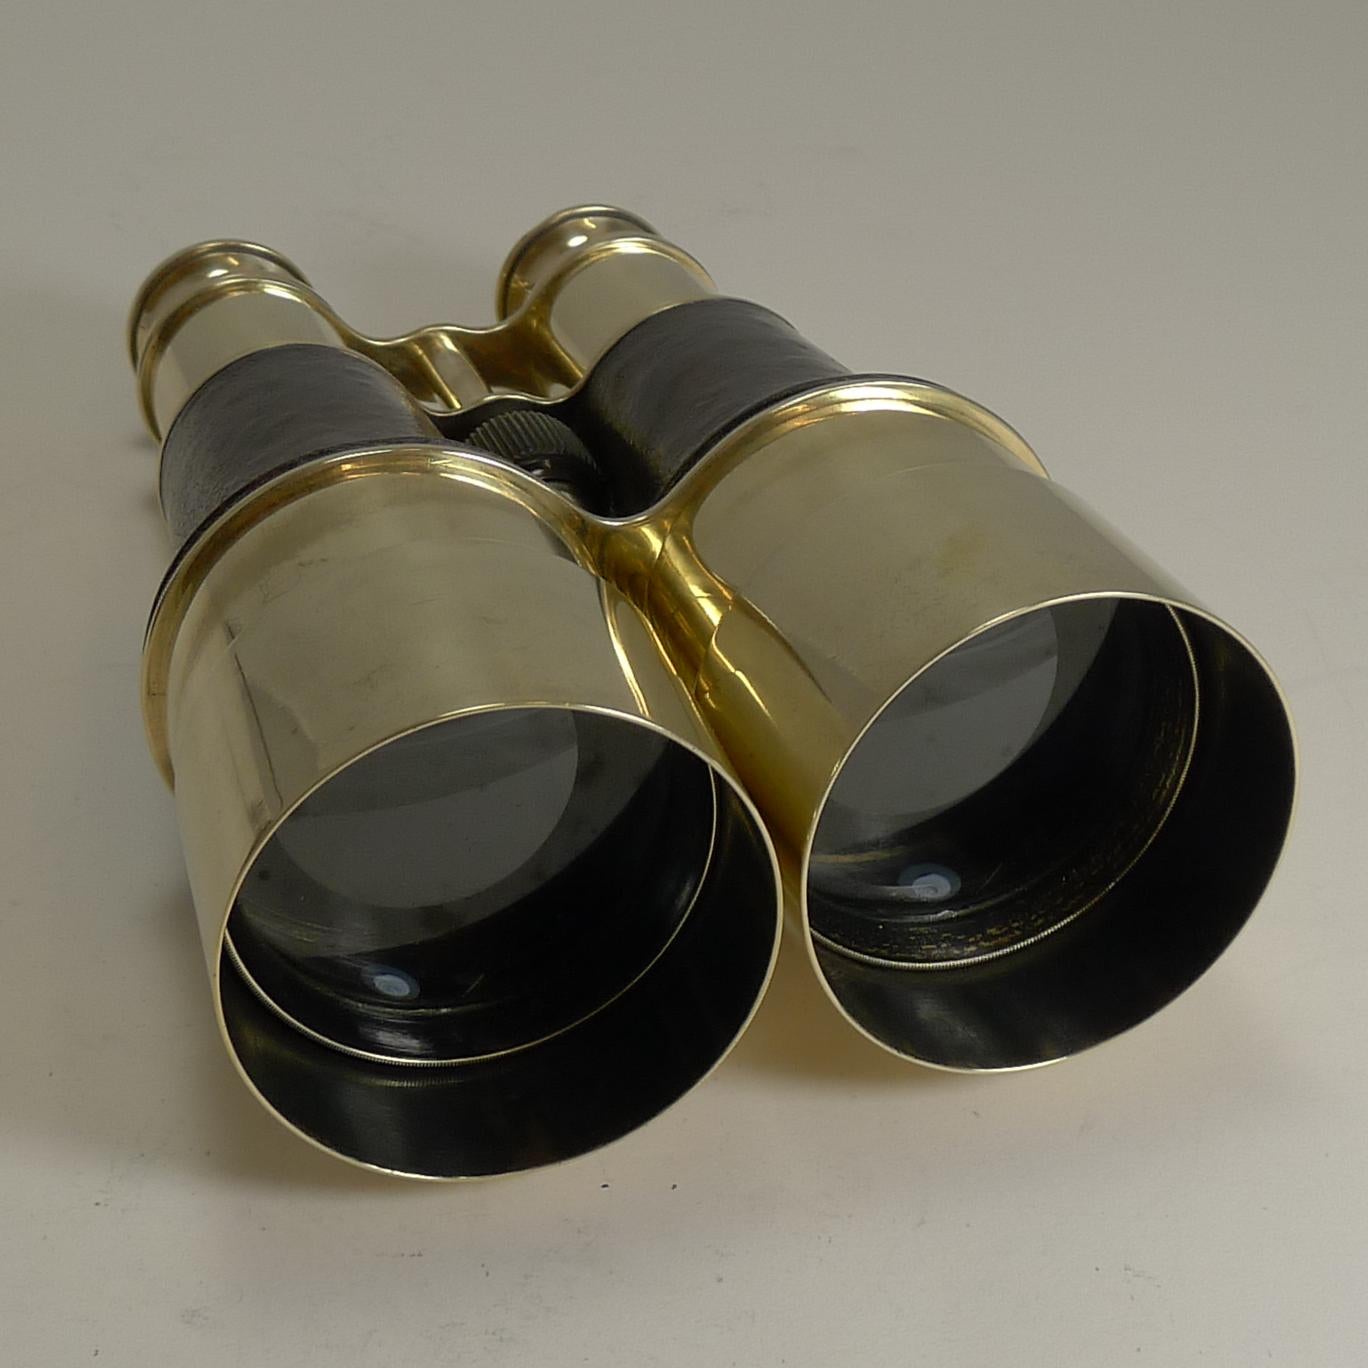 George IV Pair of WW1 Binoculars and Case, British Officer's Issue, 1917, Ross, London